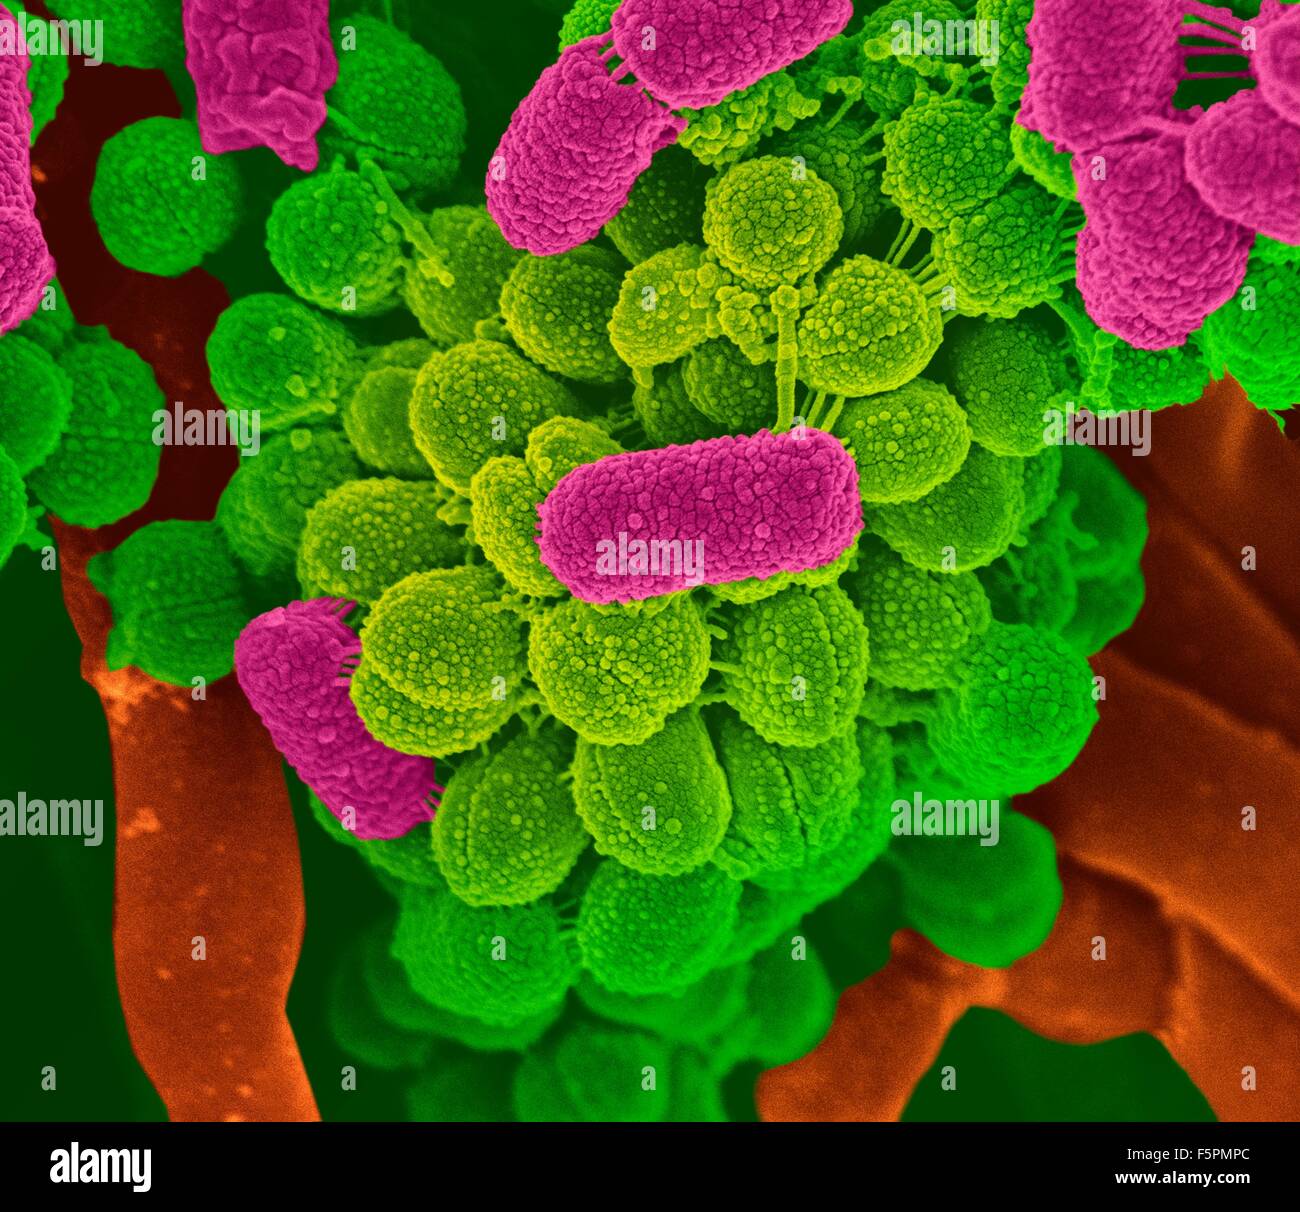 Oral bacteria. Coloured scanning electron micrograph (SEM) of mixed oral bacteria (cocci and bacilli). Stock Photo